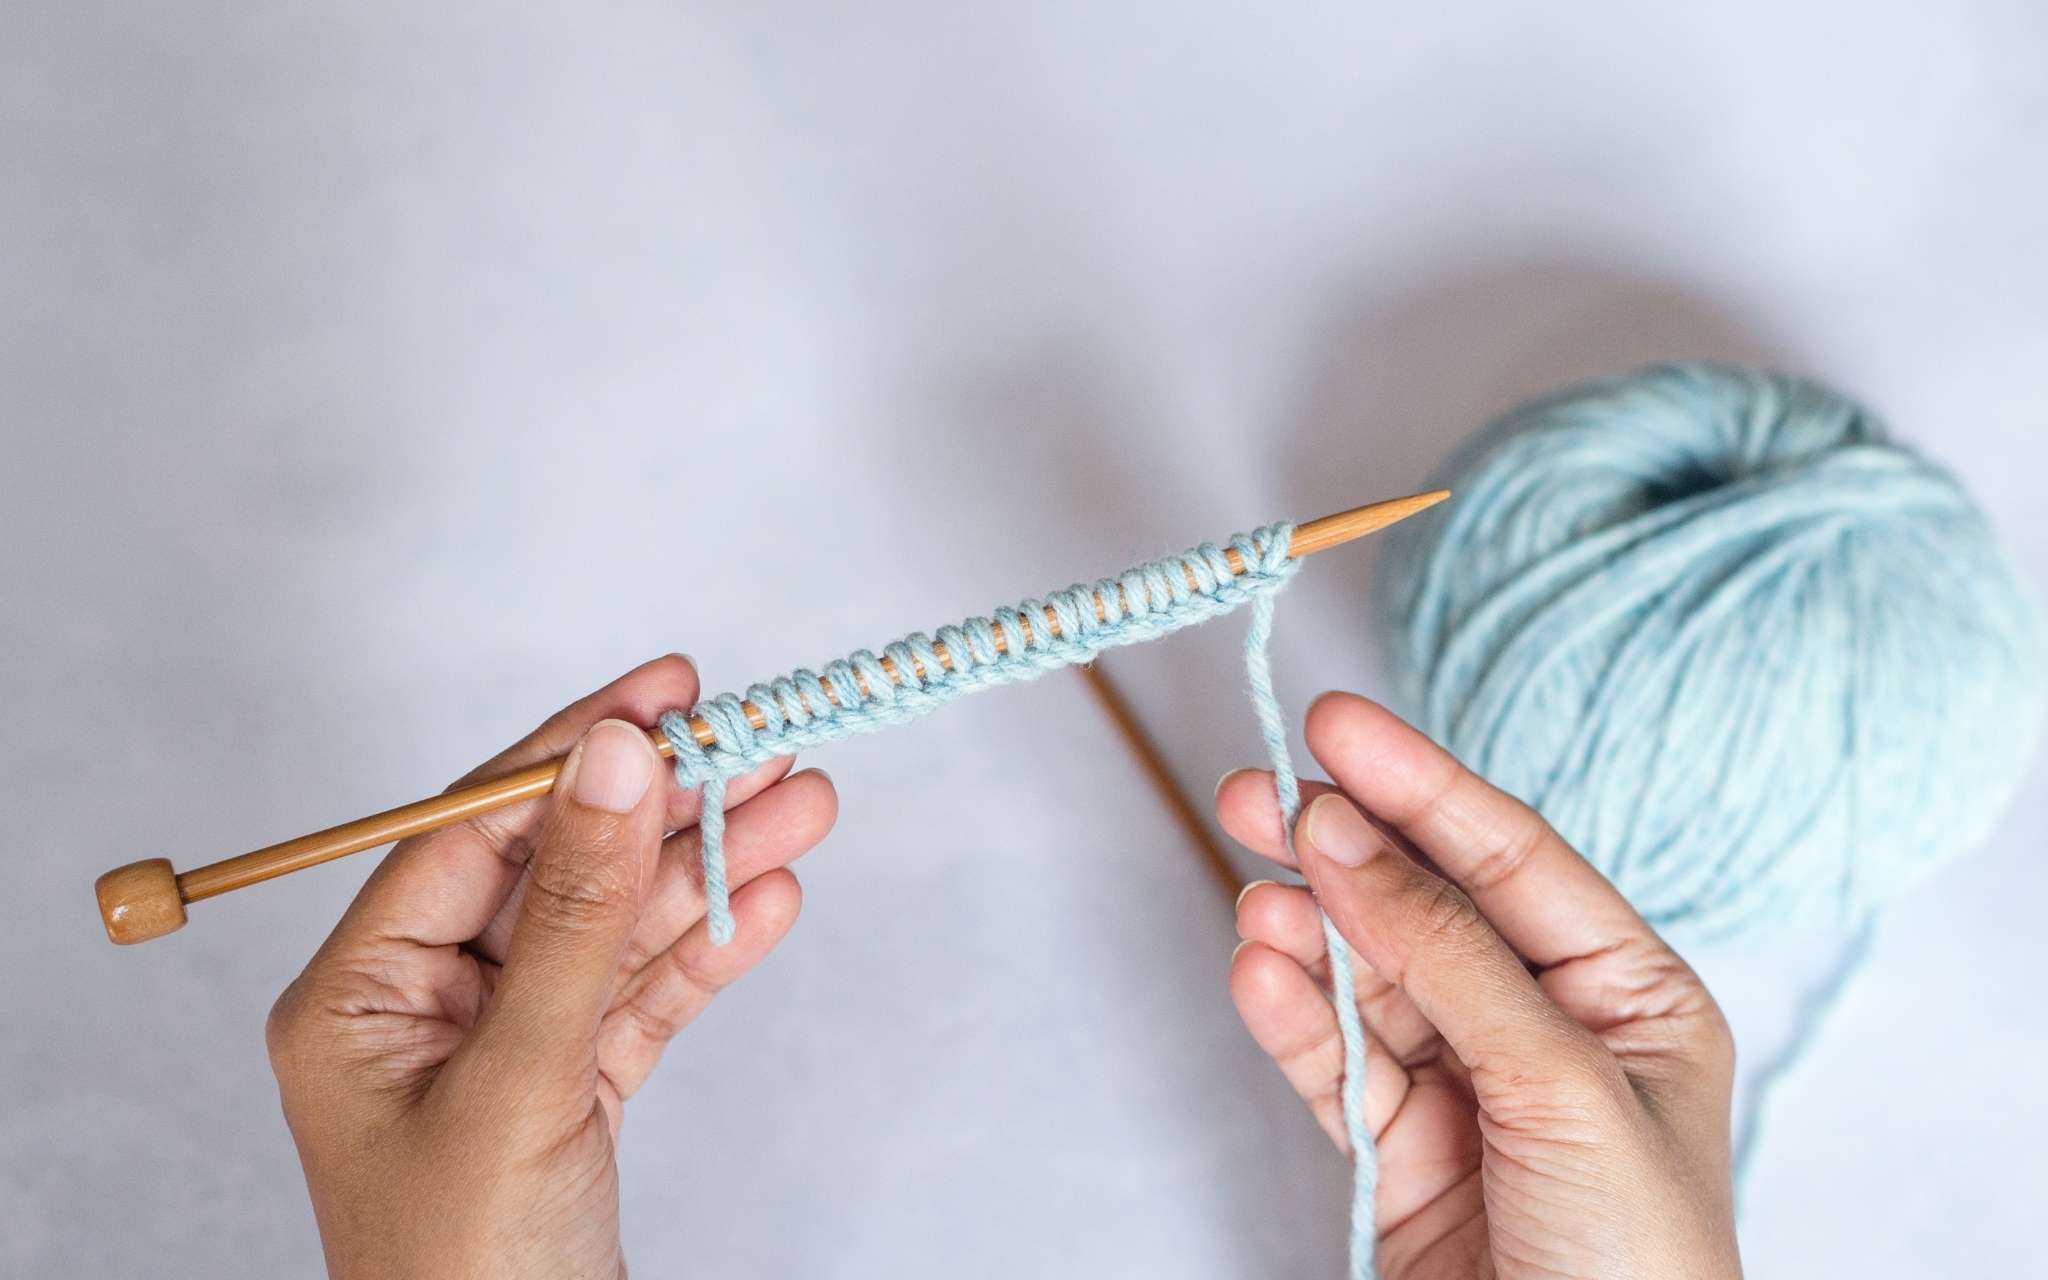 A woman of colour holds a cast on row of stitches on a straight knitting needle. The stitches are in pale blue yarn and the ball of yarn lies to the right of the image.